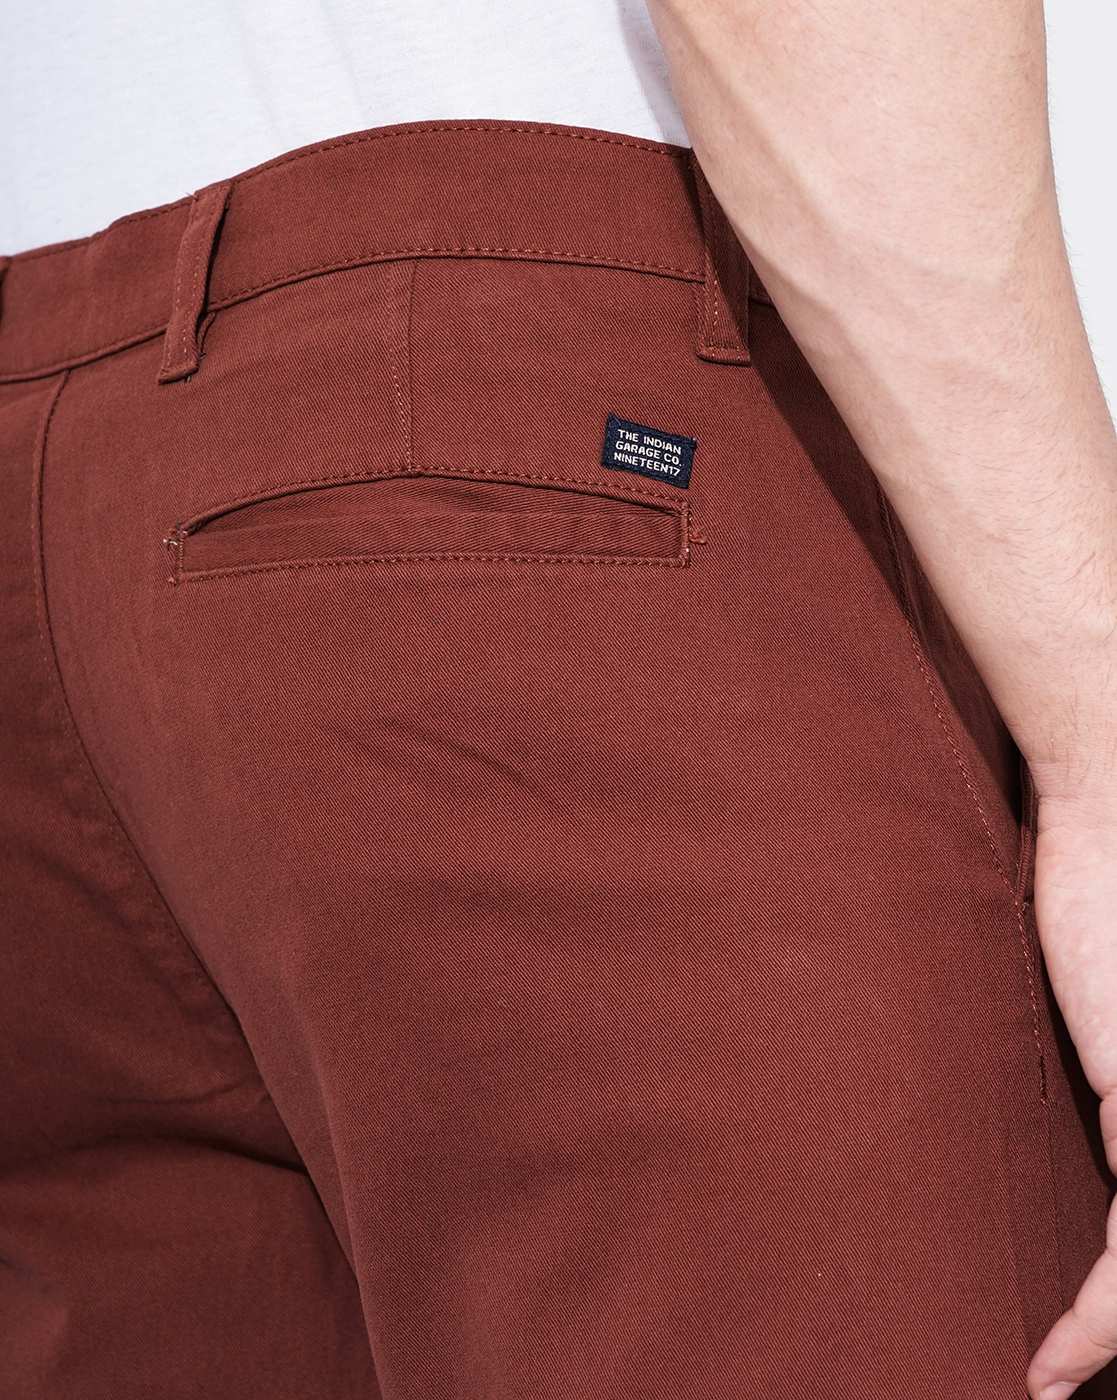 Buy Brown Trousers & Pants for Men by The Indian Garage Co Online